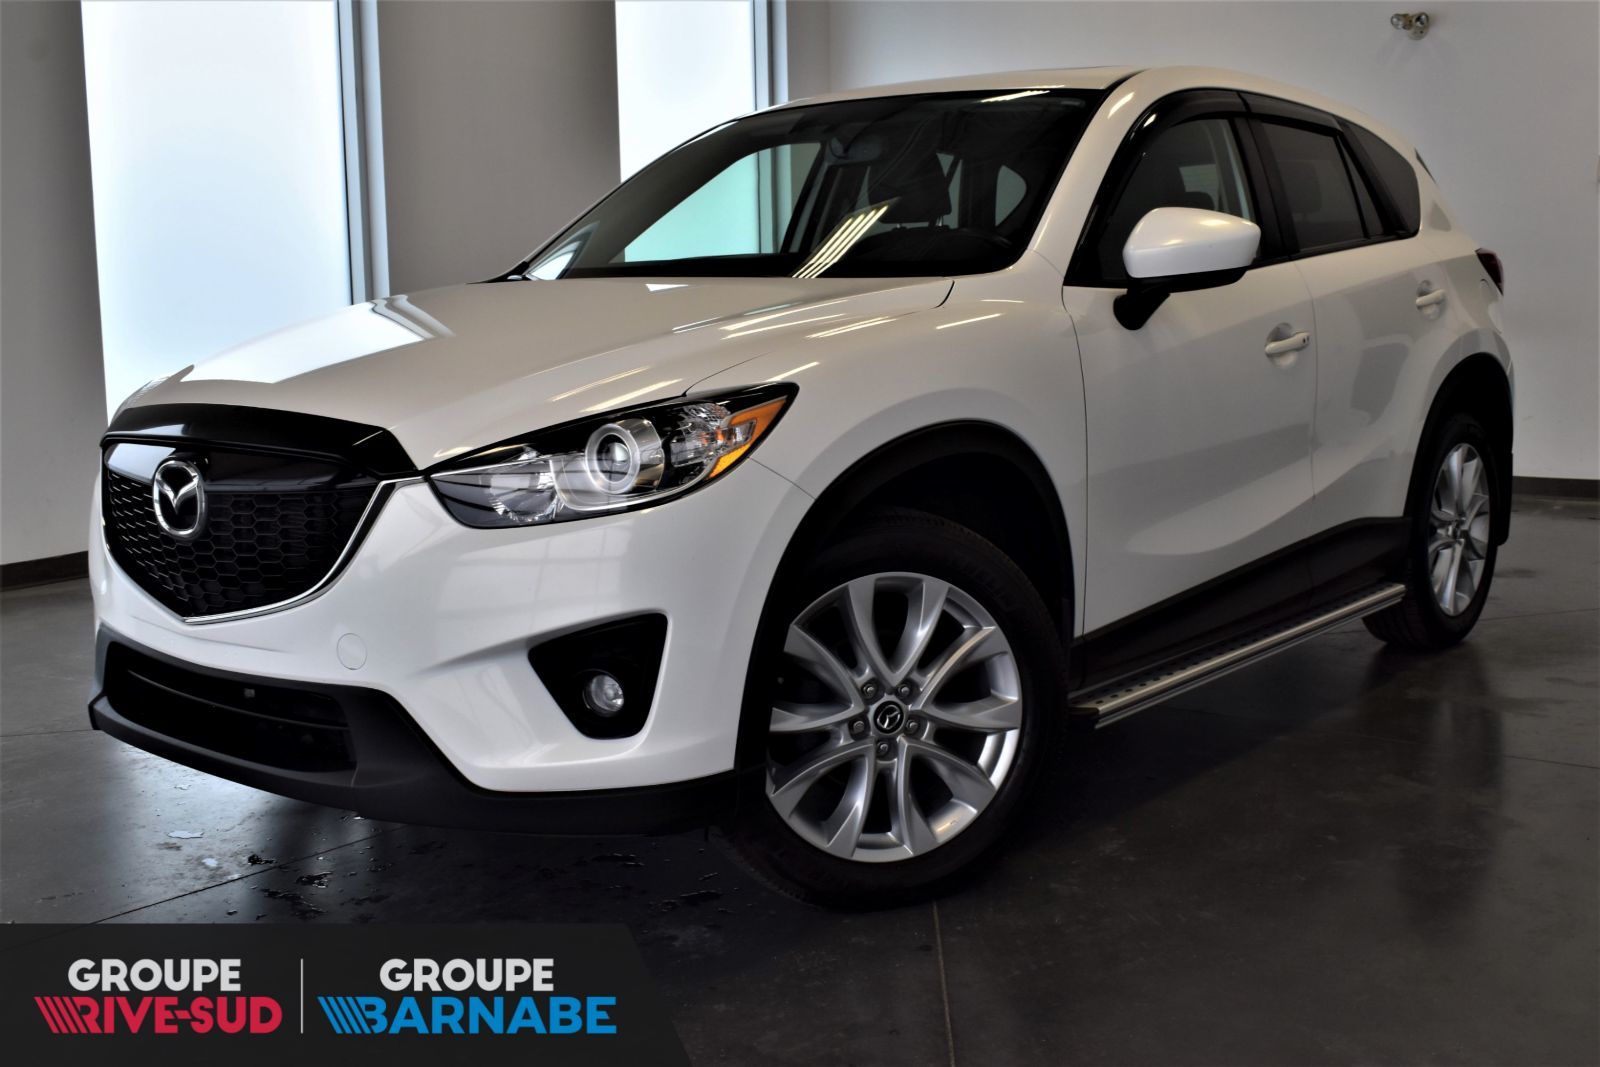 Barnabe Mazda Pre Owned 2015 Mazda Cx 5 Gt Awd Cuir Gps Toit Audio Bose For Sale